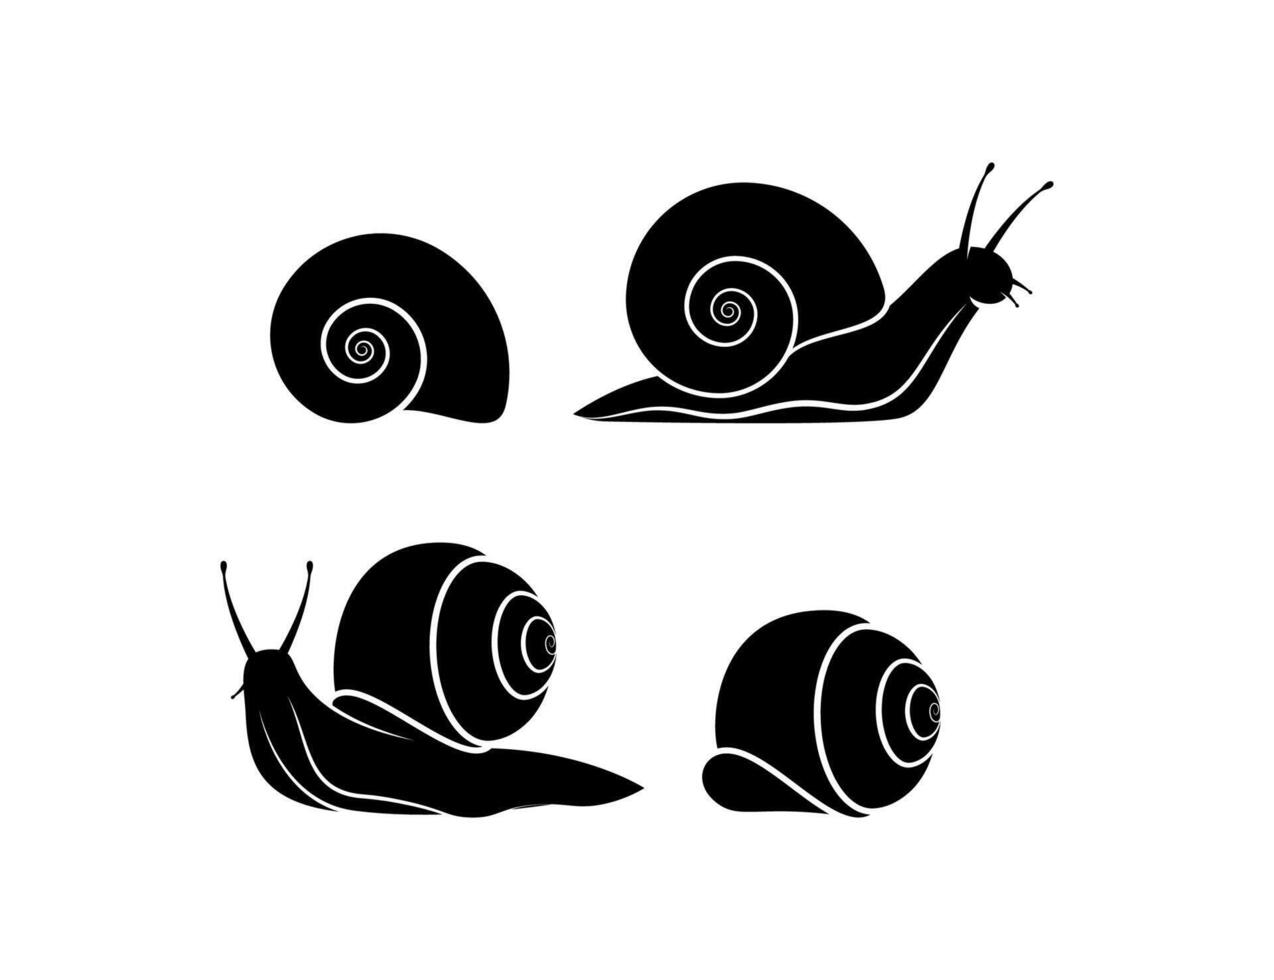 Snail silhouette vector isolated on white background.